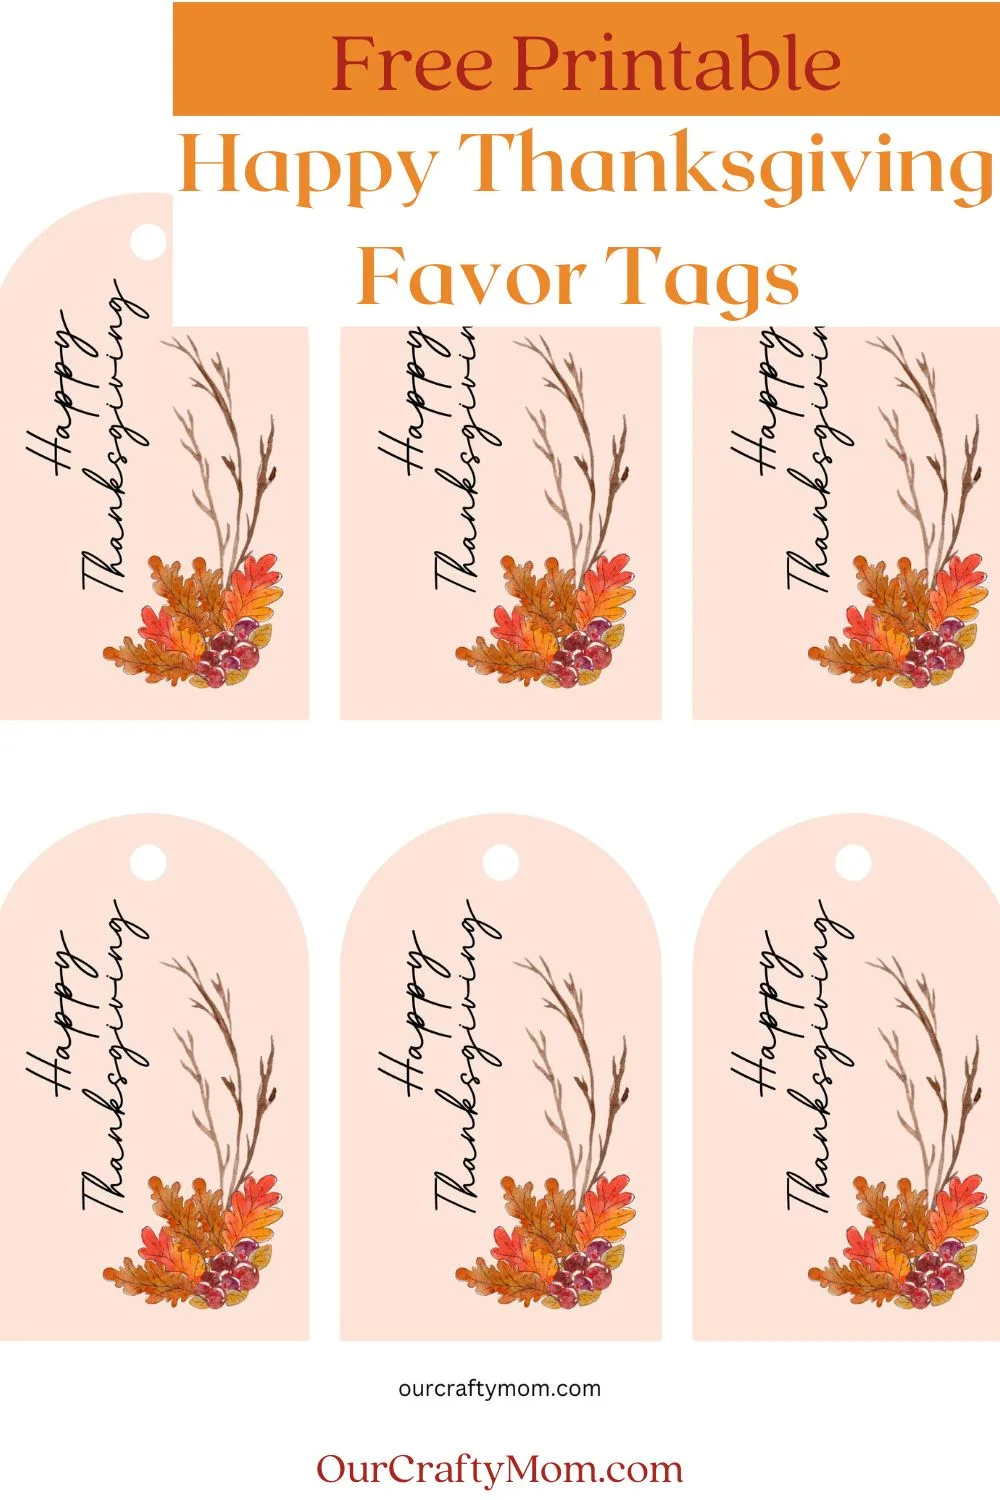 Happy Thanksgiving favor tags